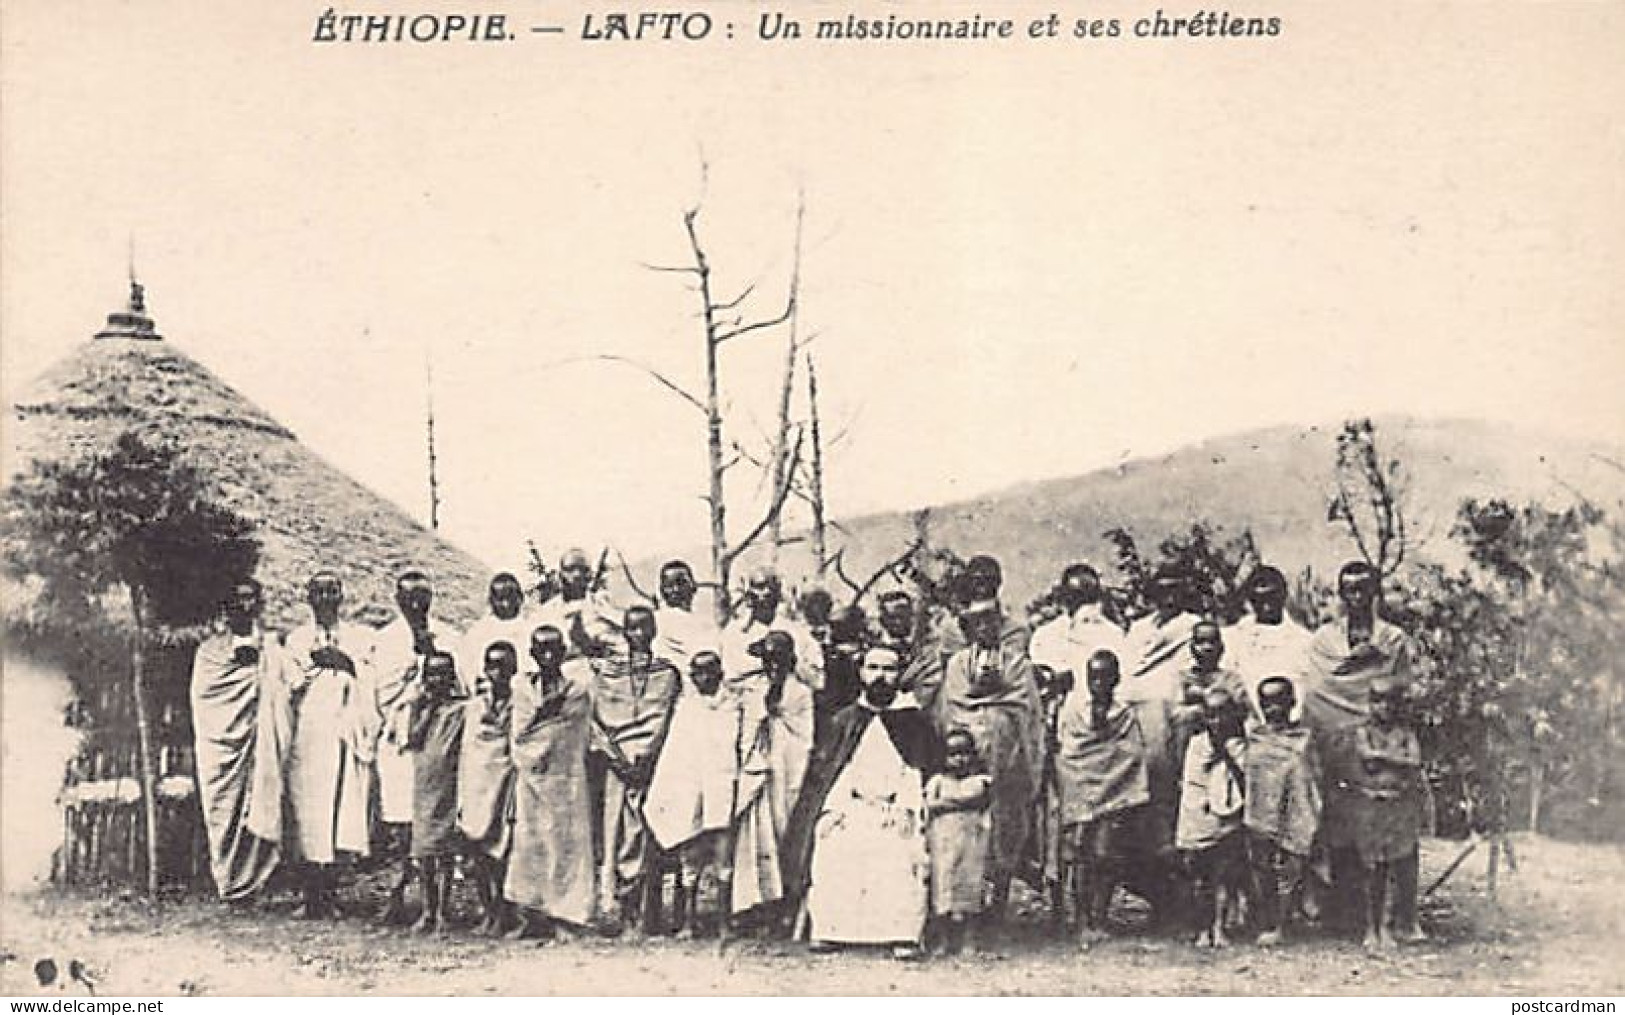 Ethiopia - LAFTO - A Missionary And His Christians - Publ. Franciscan Voices - Äthiopien